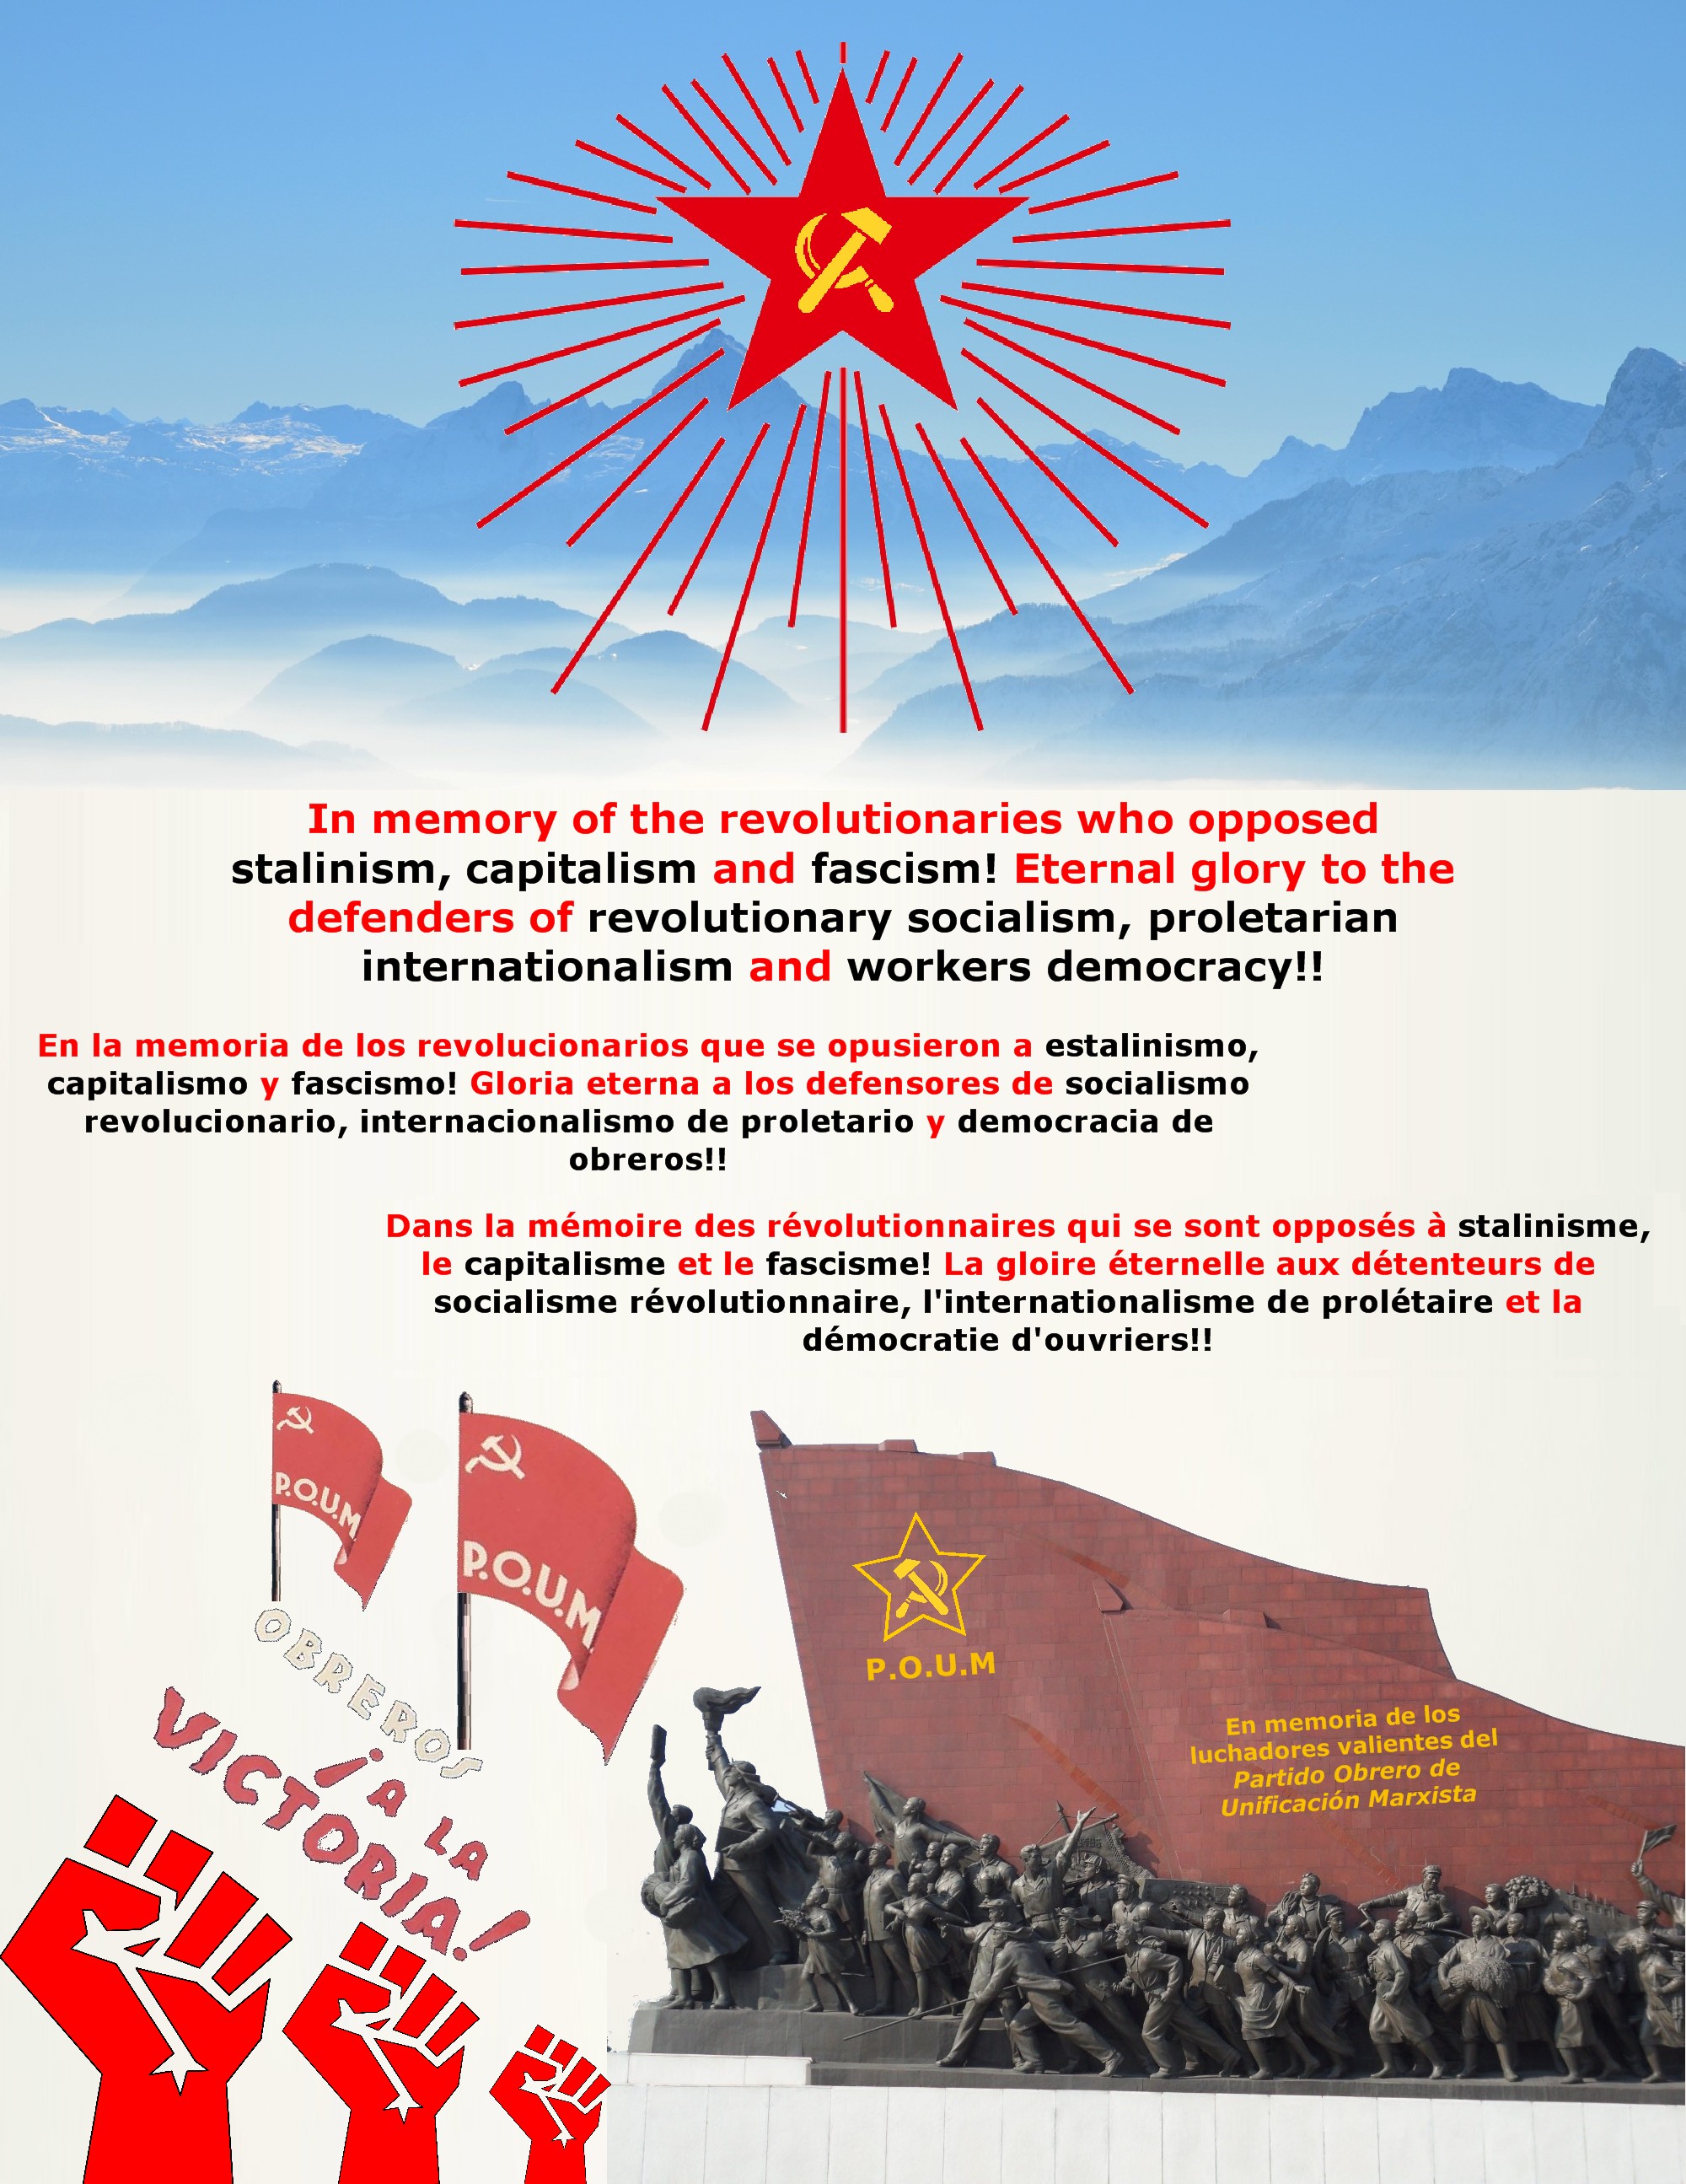 In memory of the revolutionary socialists